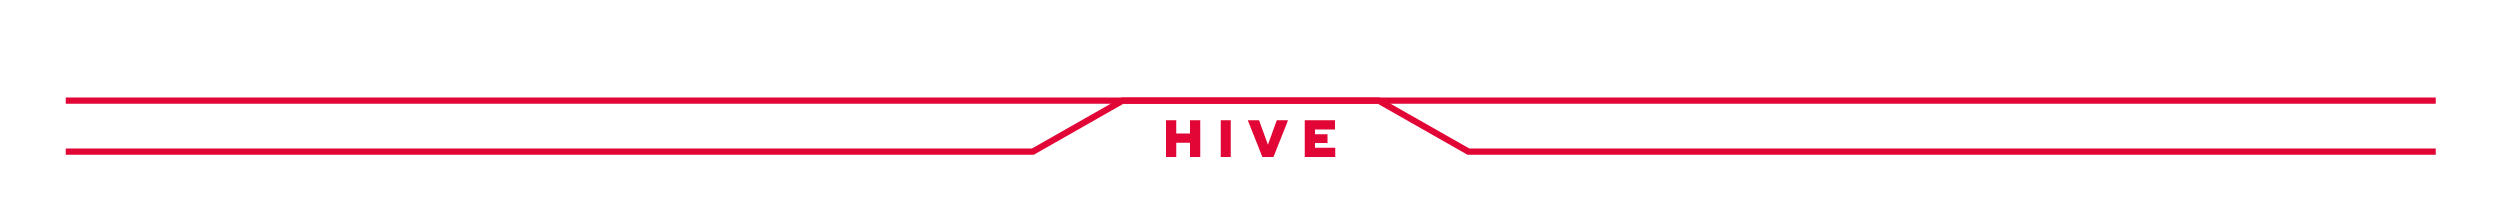 hive dividers-10.png